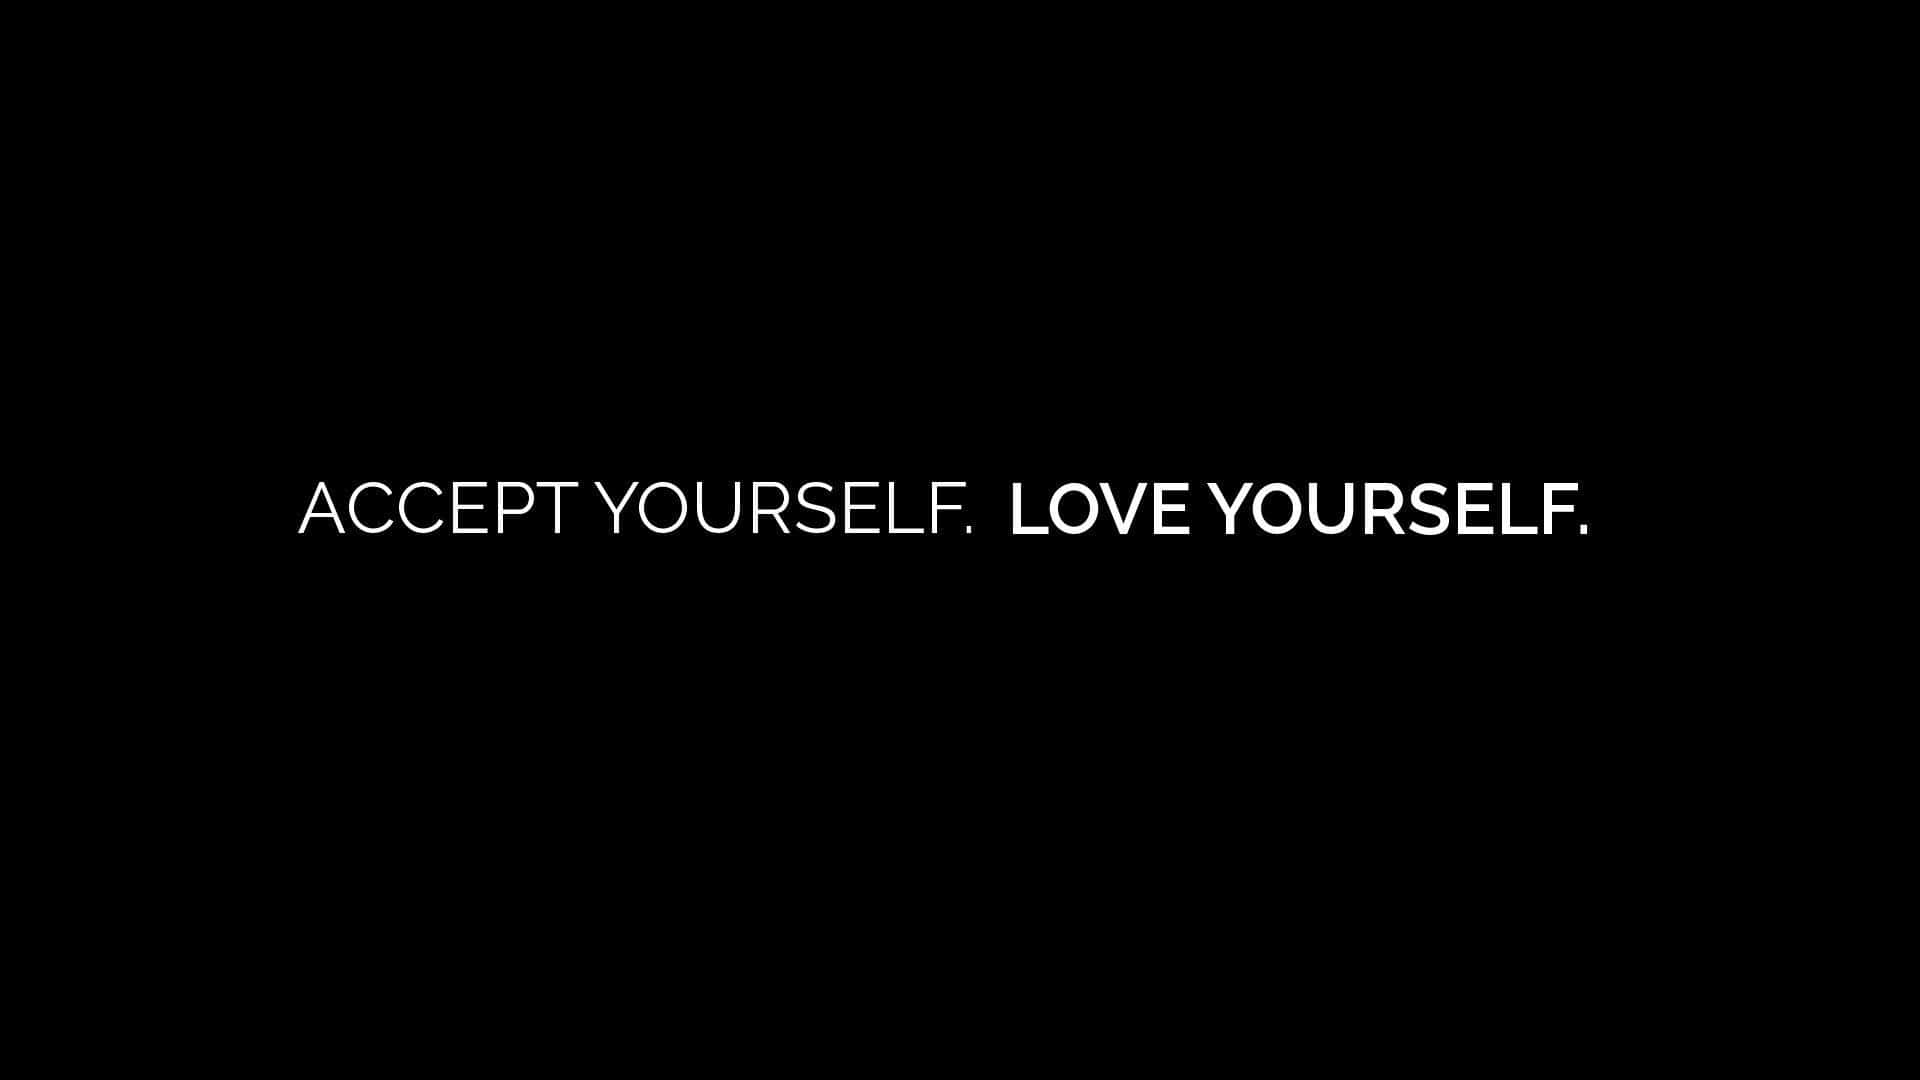 Embrace Your Essence - Love Yourself Background